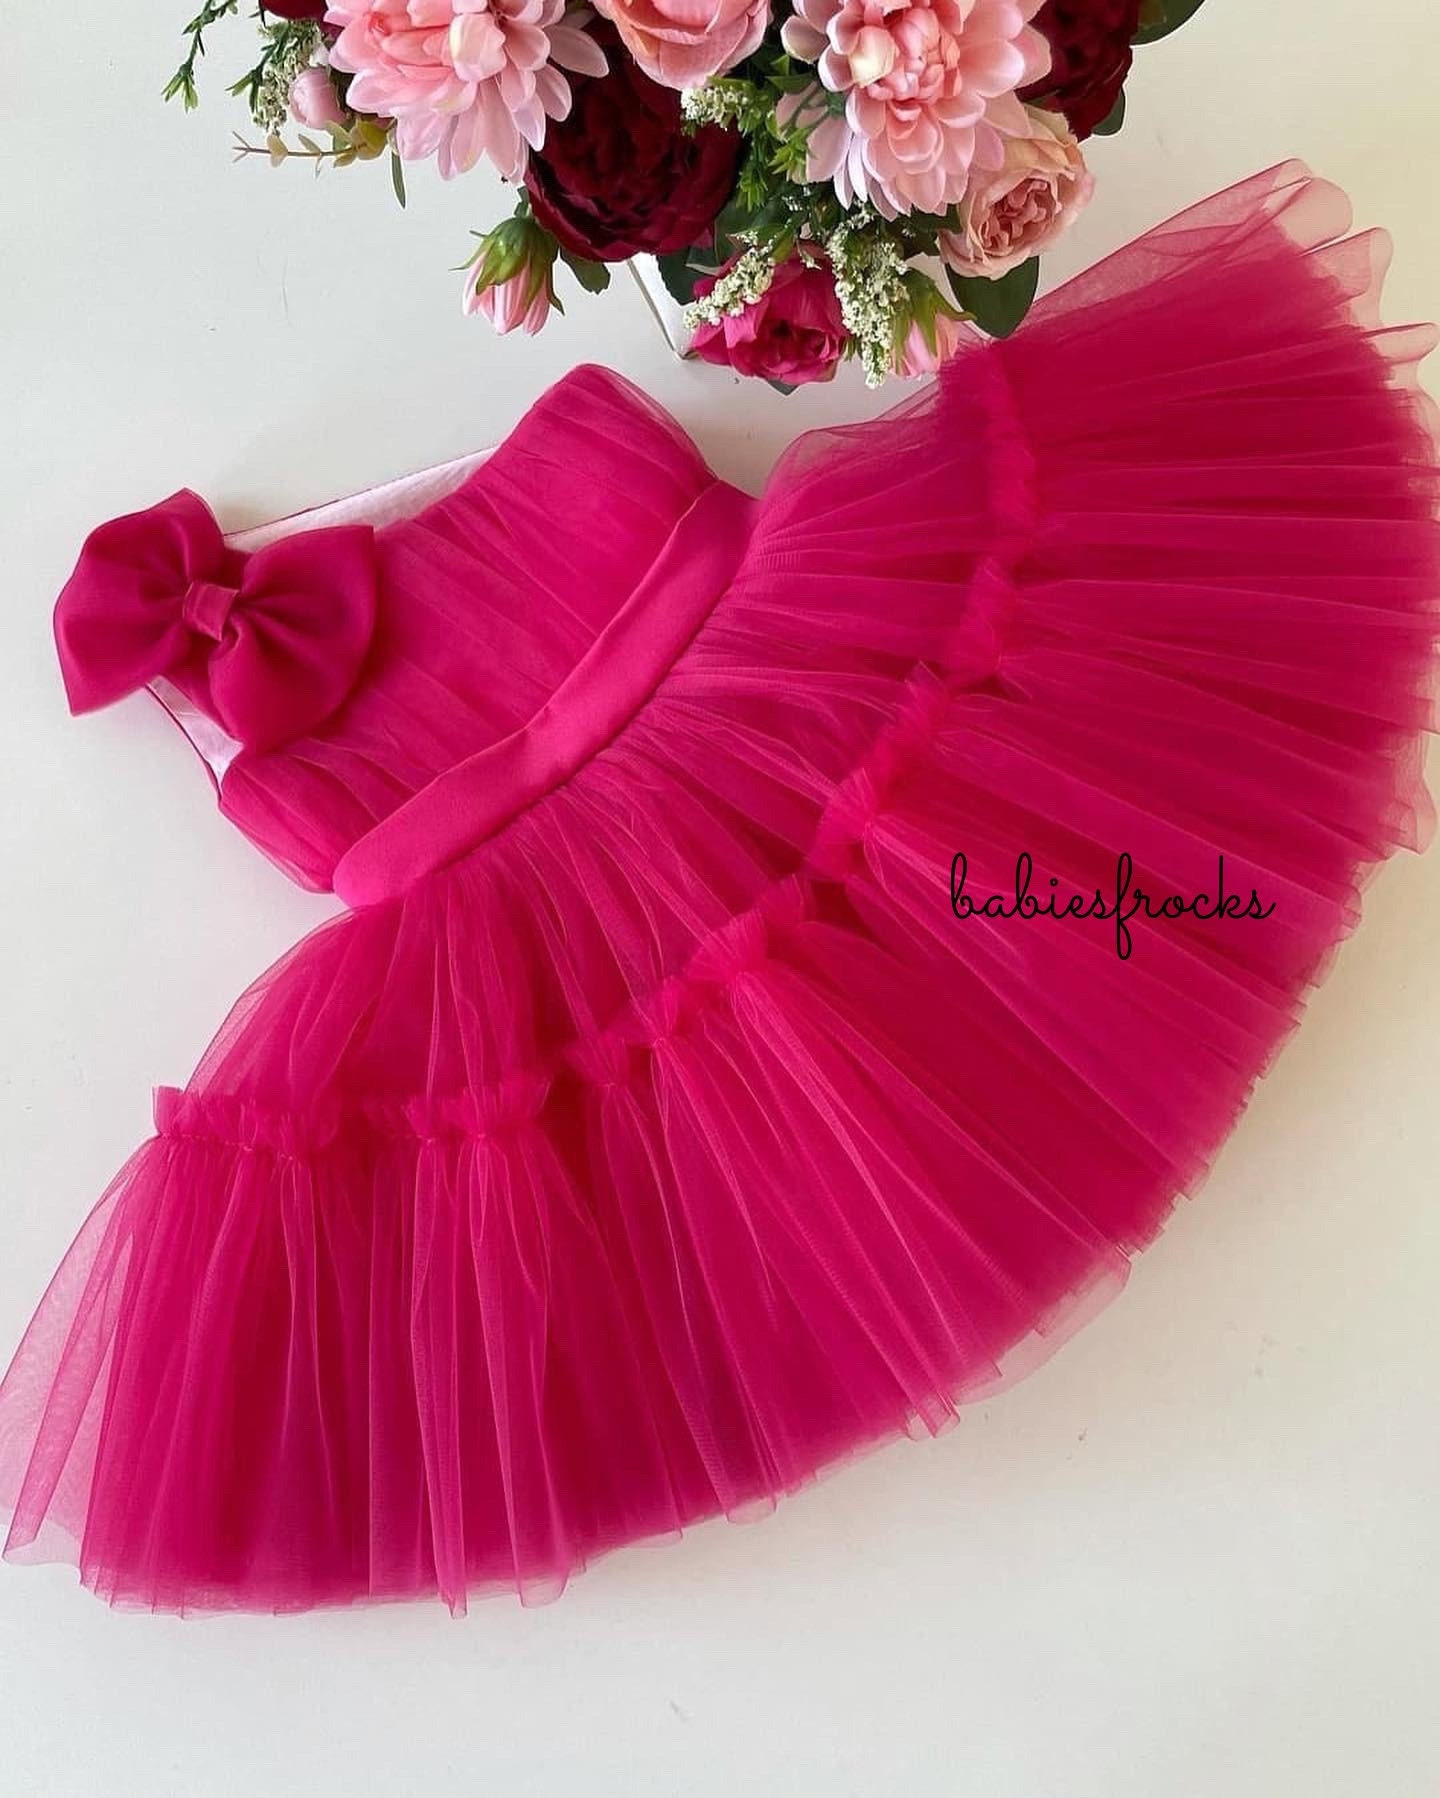 Kids Dresses For Girls 0 3 Months Newborn Baby Girl Clothes Summer Pink  Lace Flower Tutu Princess Baby Dress Birthday 1 Year 1027 From Bailixi06,  $23.51 | DHgate.Com